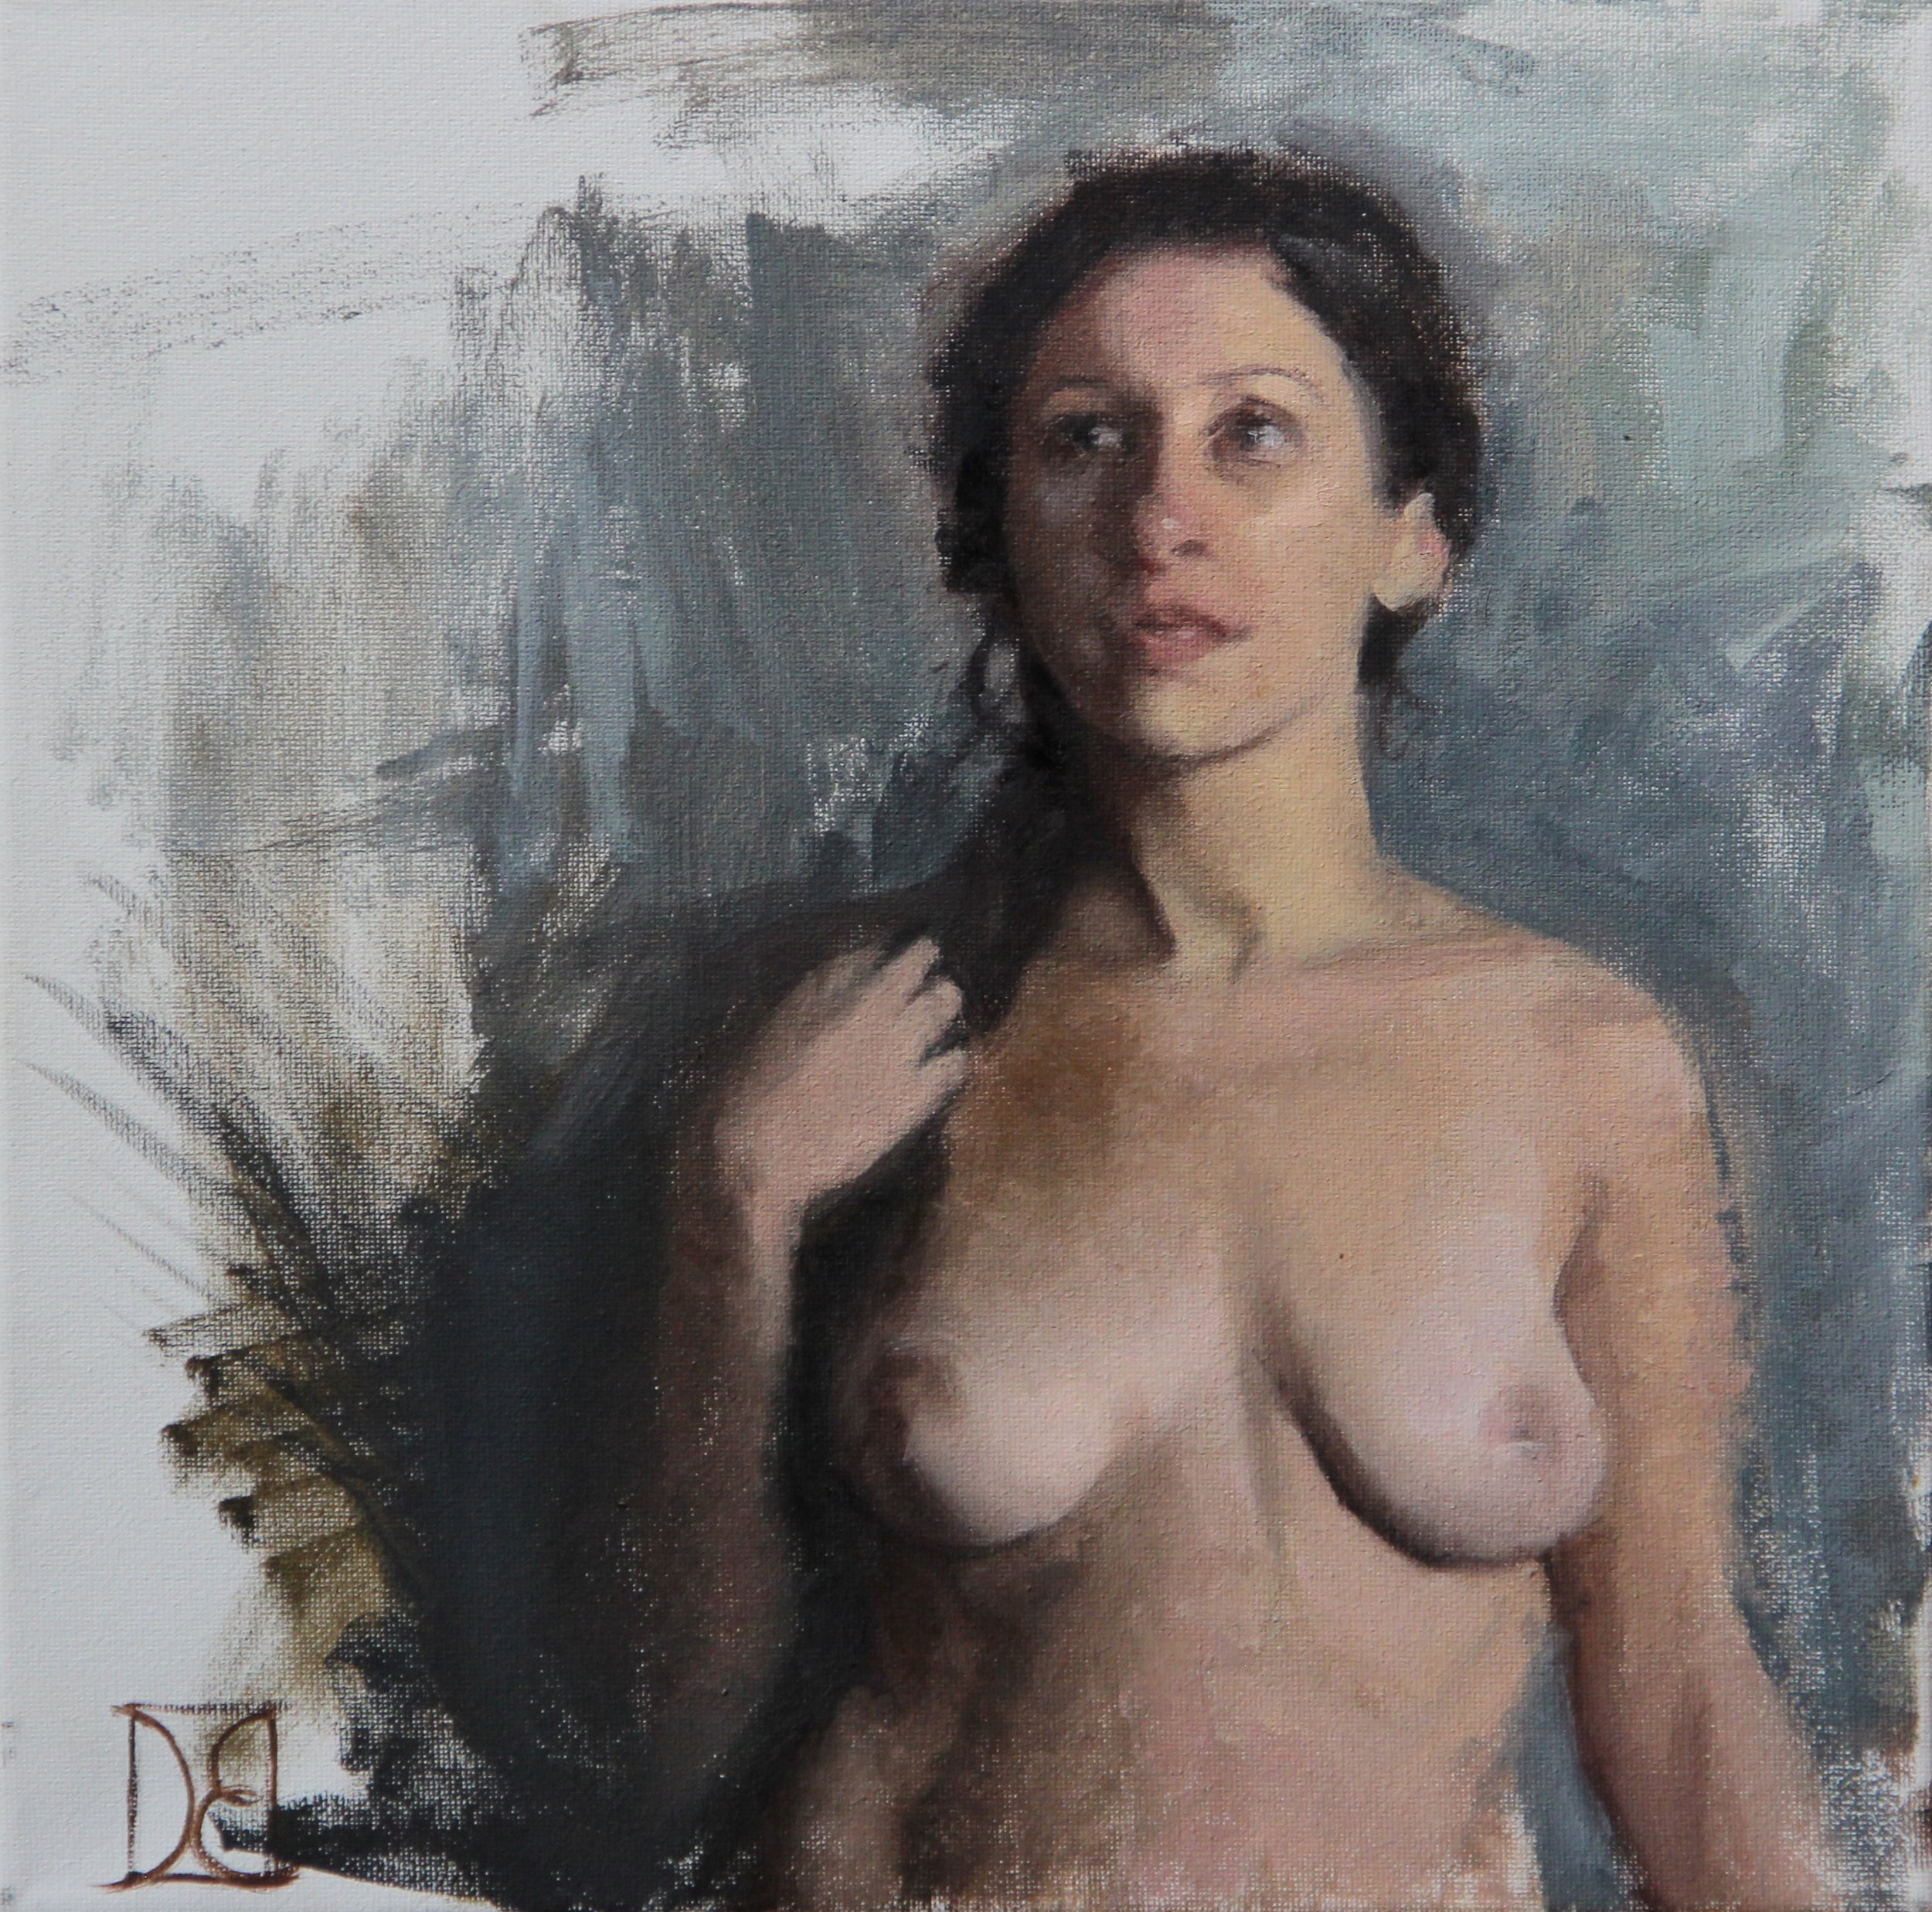   “Study of Stefanie”   12x12, Oil on Canvas  $400 SOLD 